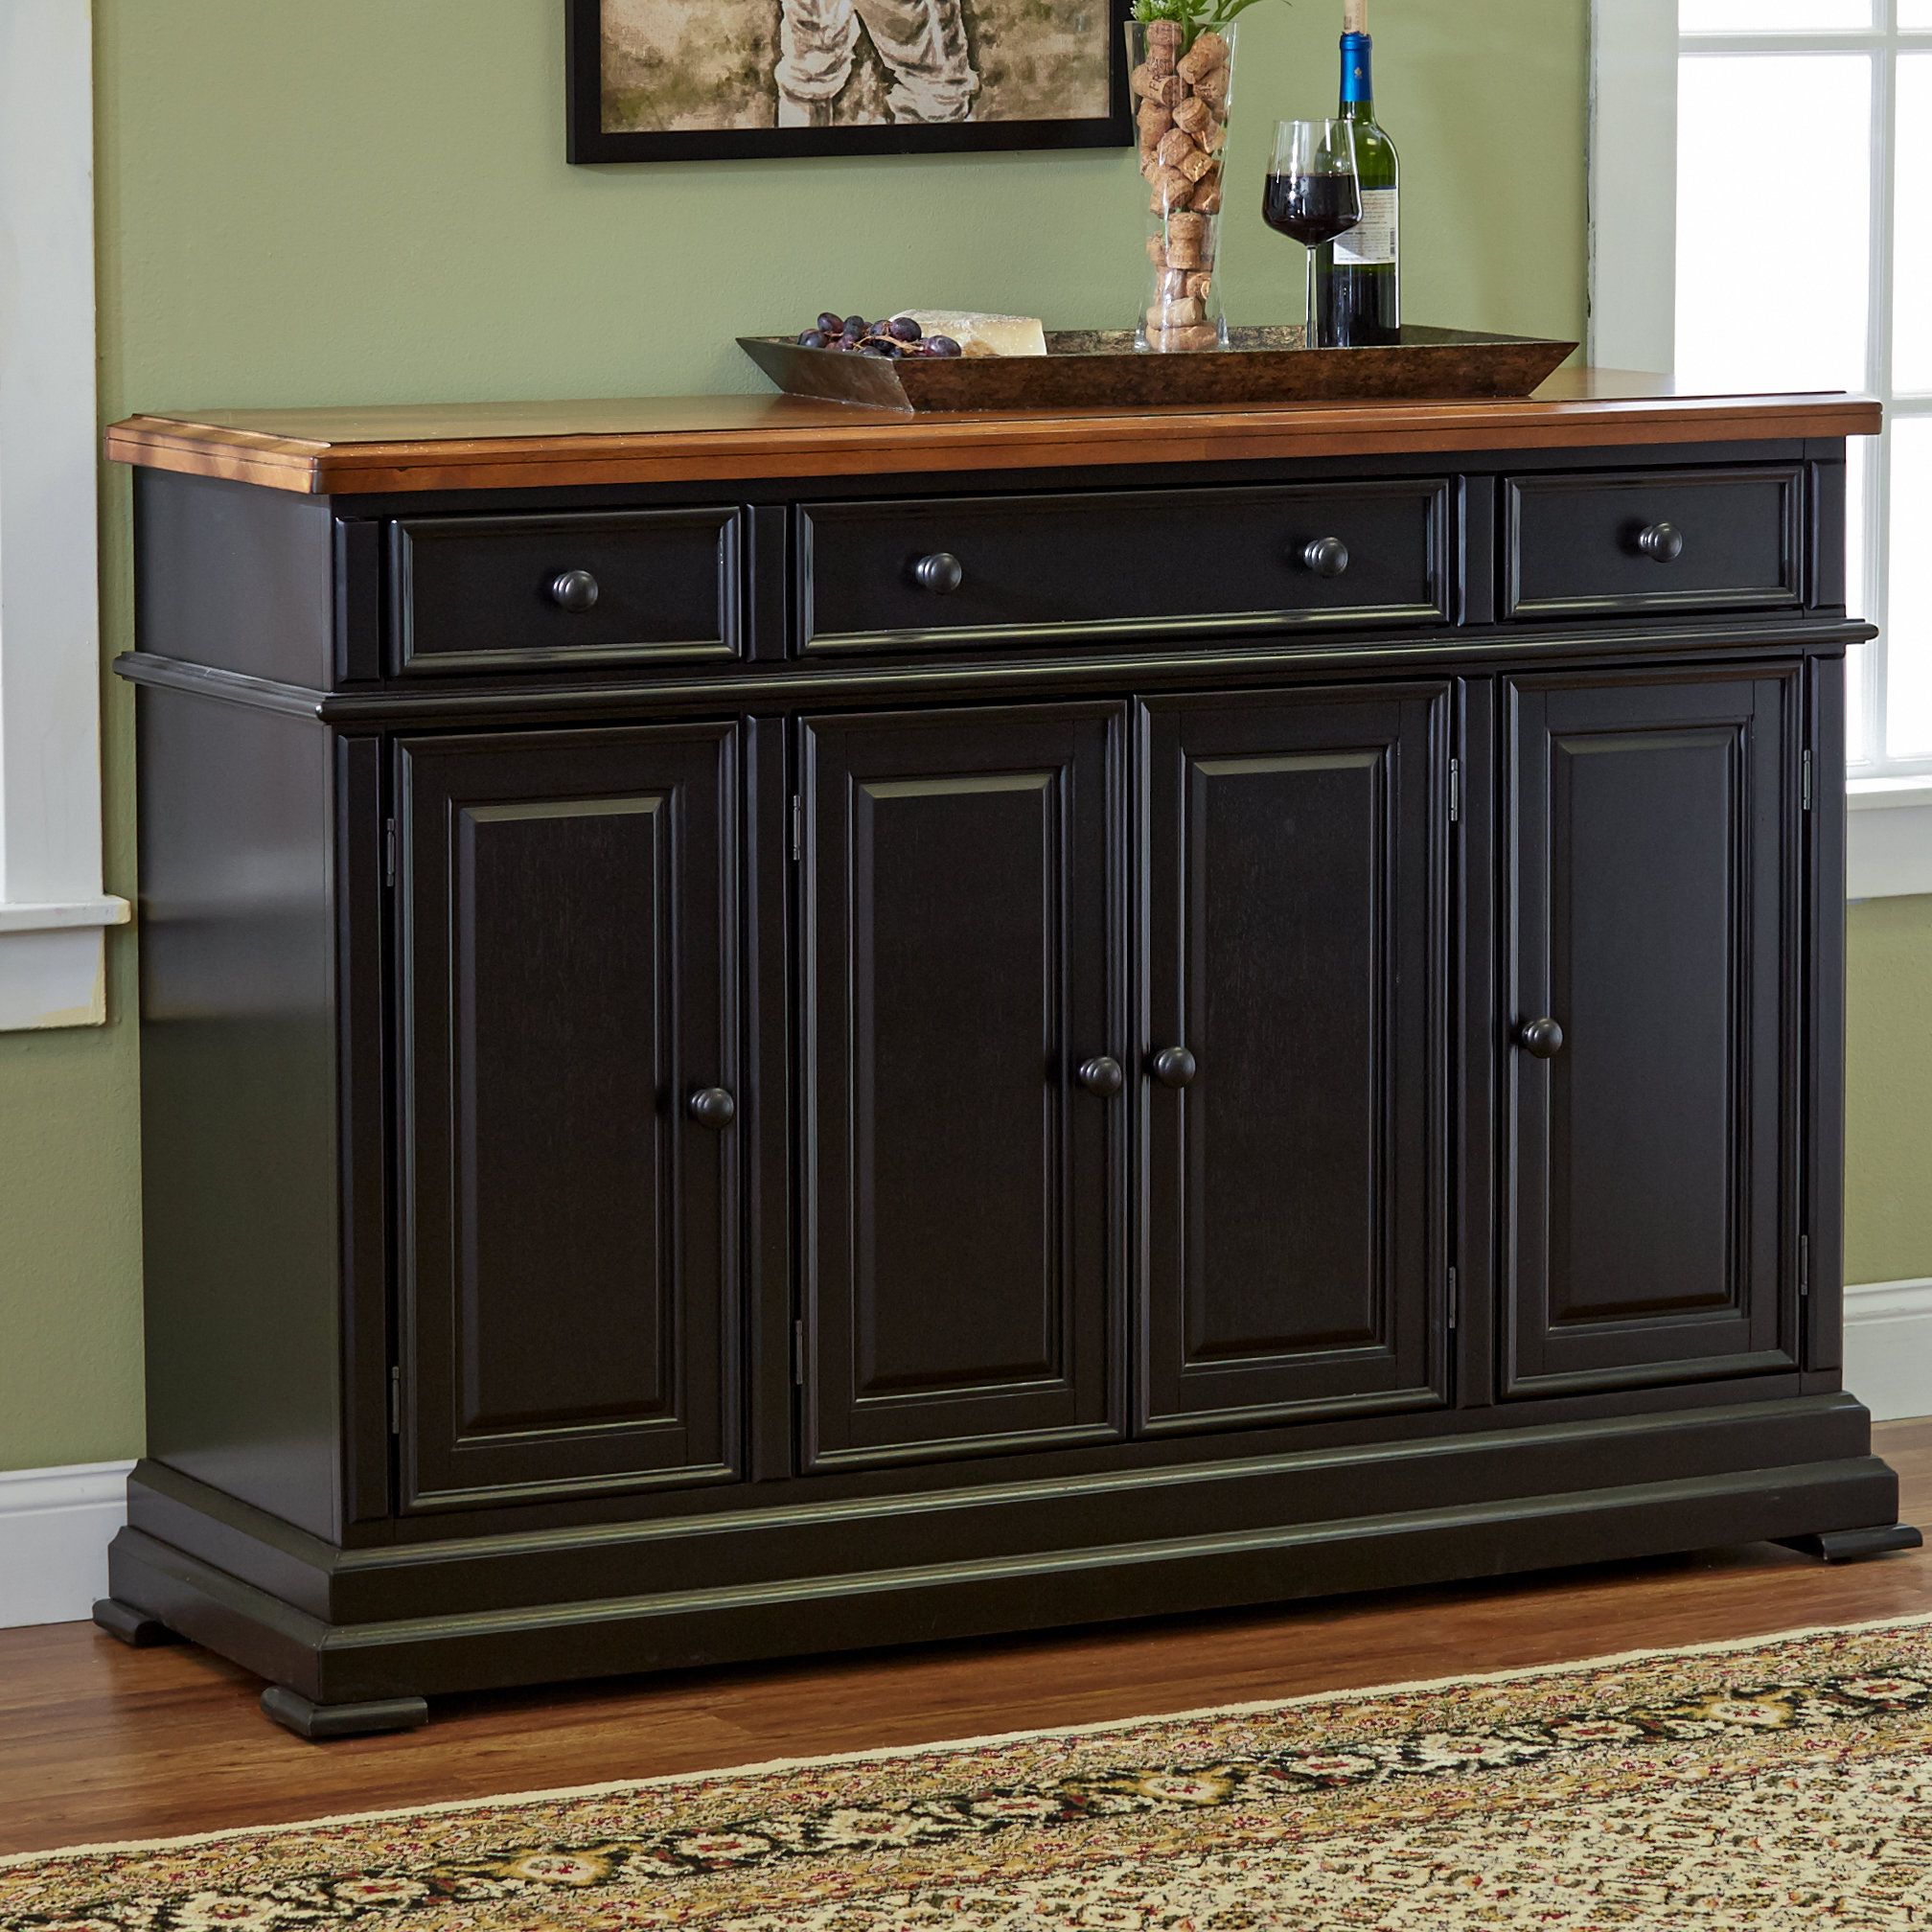 Courtdale Sideboard Pertaining To Hewlett Sideboards (View 16 of 30)